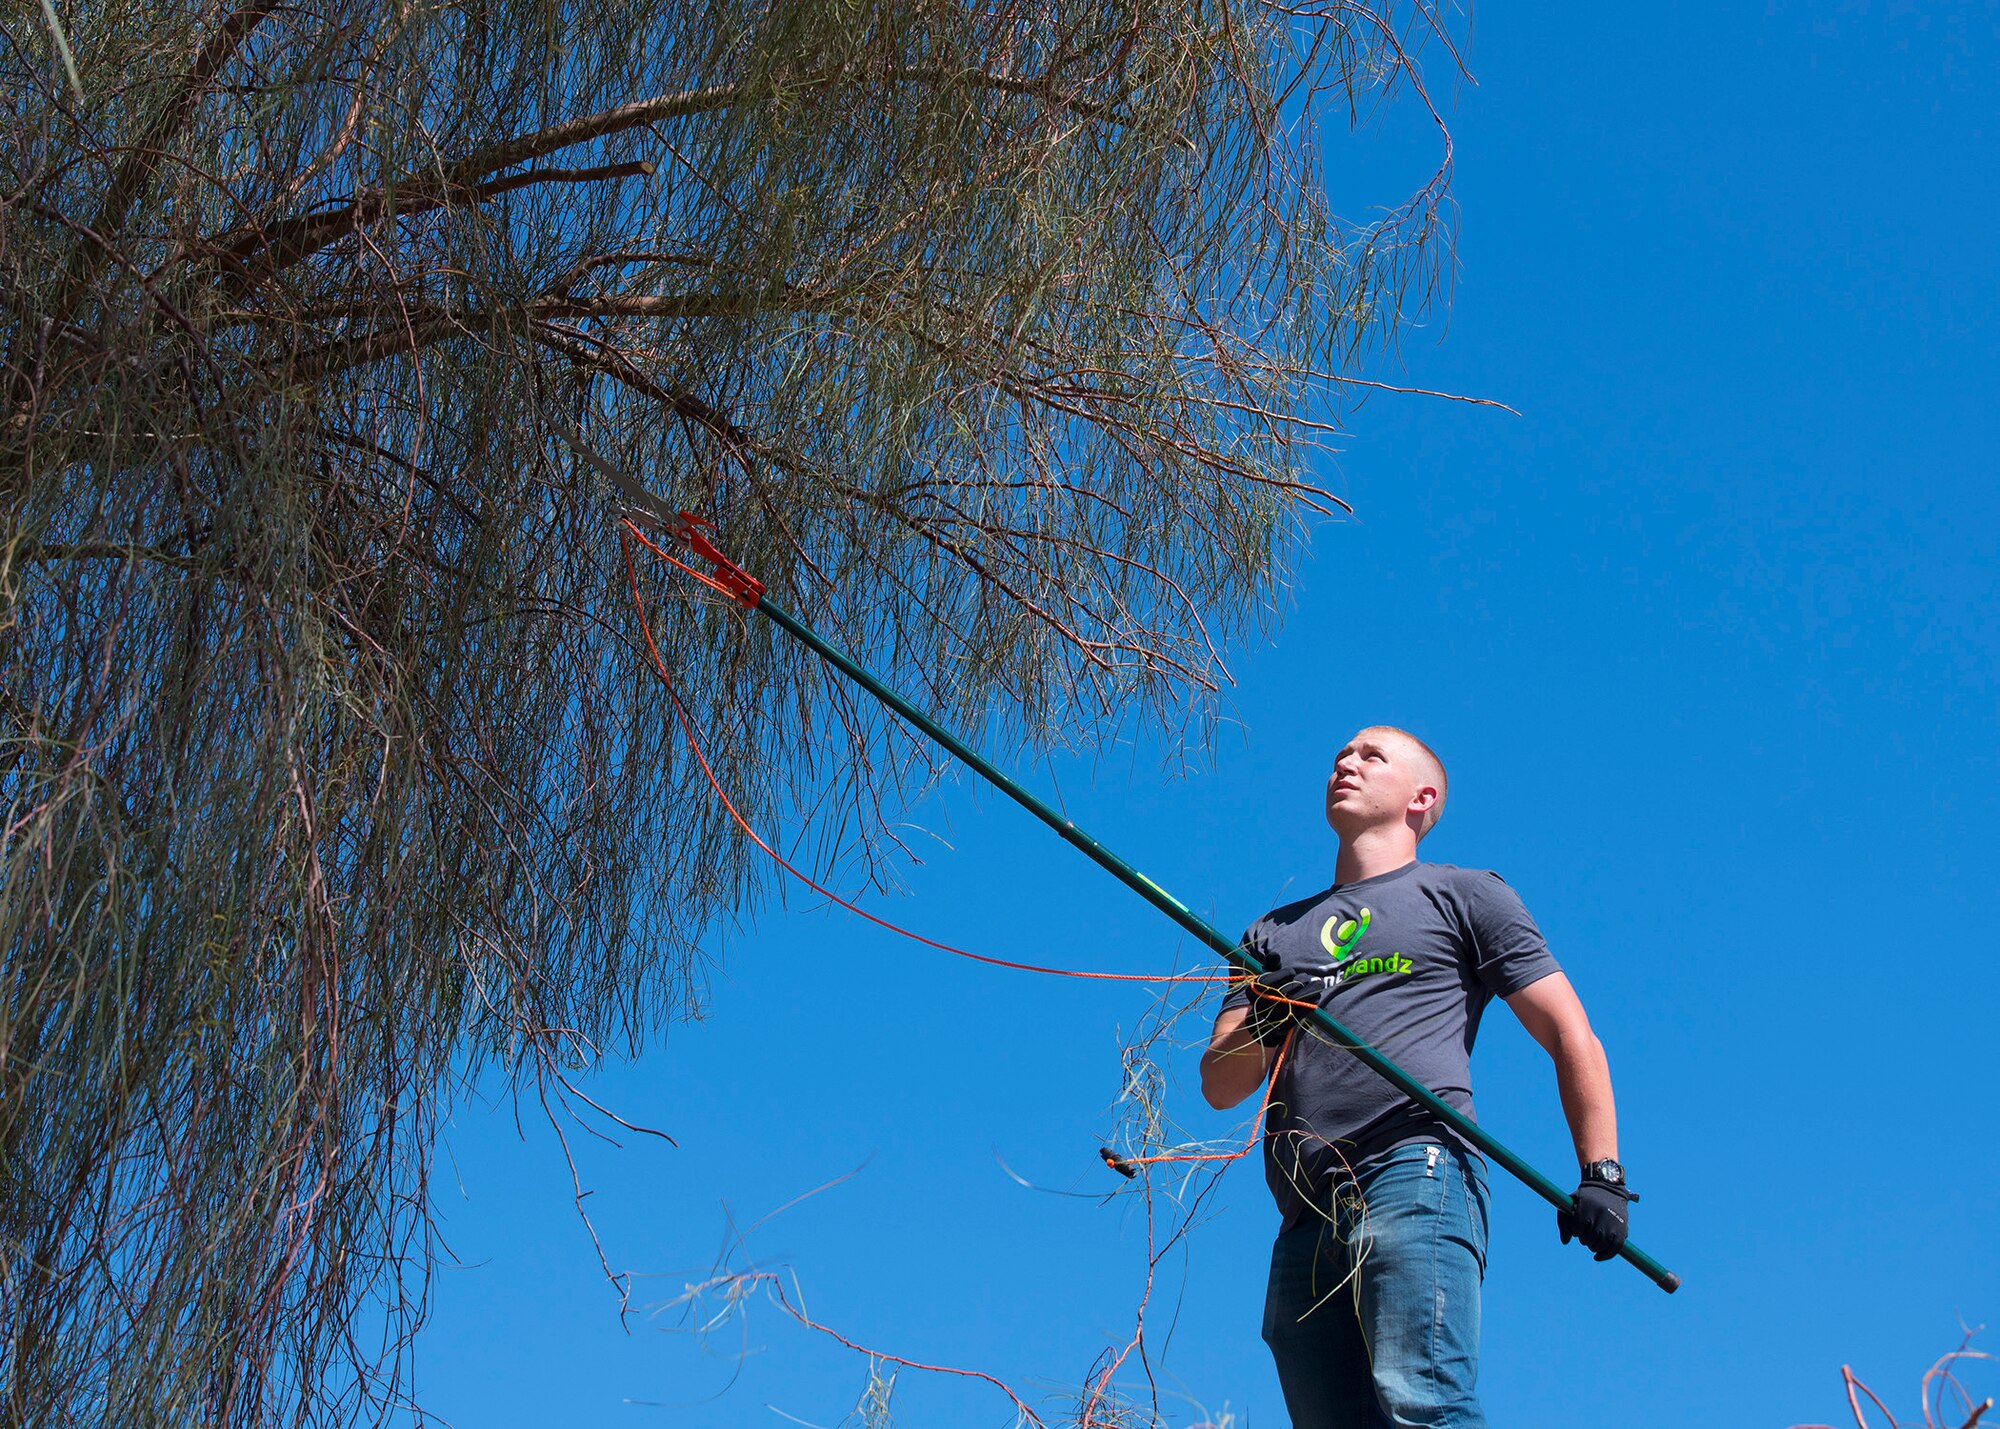 Senior Airman Montana McCormick, 56th Force Support Squadron lead recreational specialist, trims a tree April 1, 2020, in Avondale, Ariz.